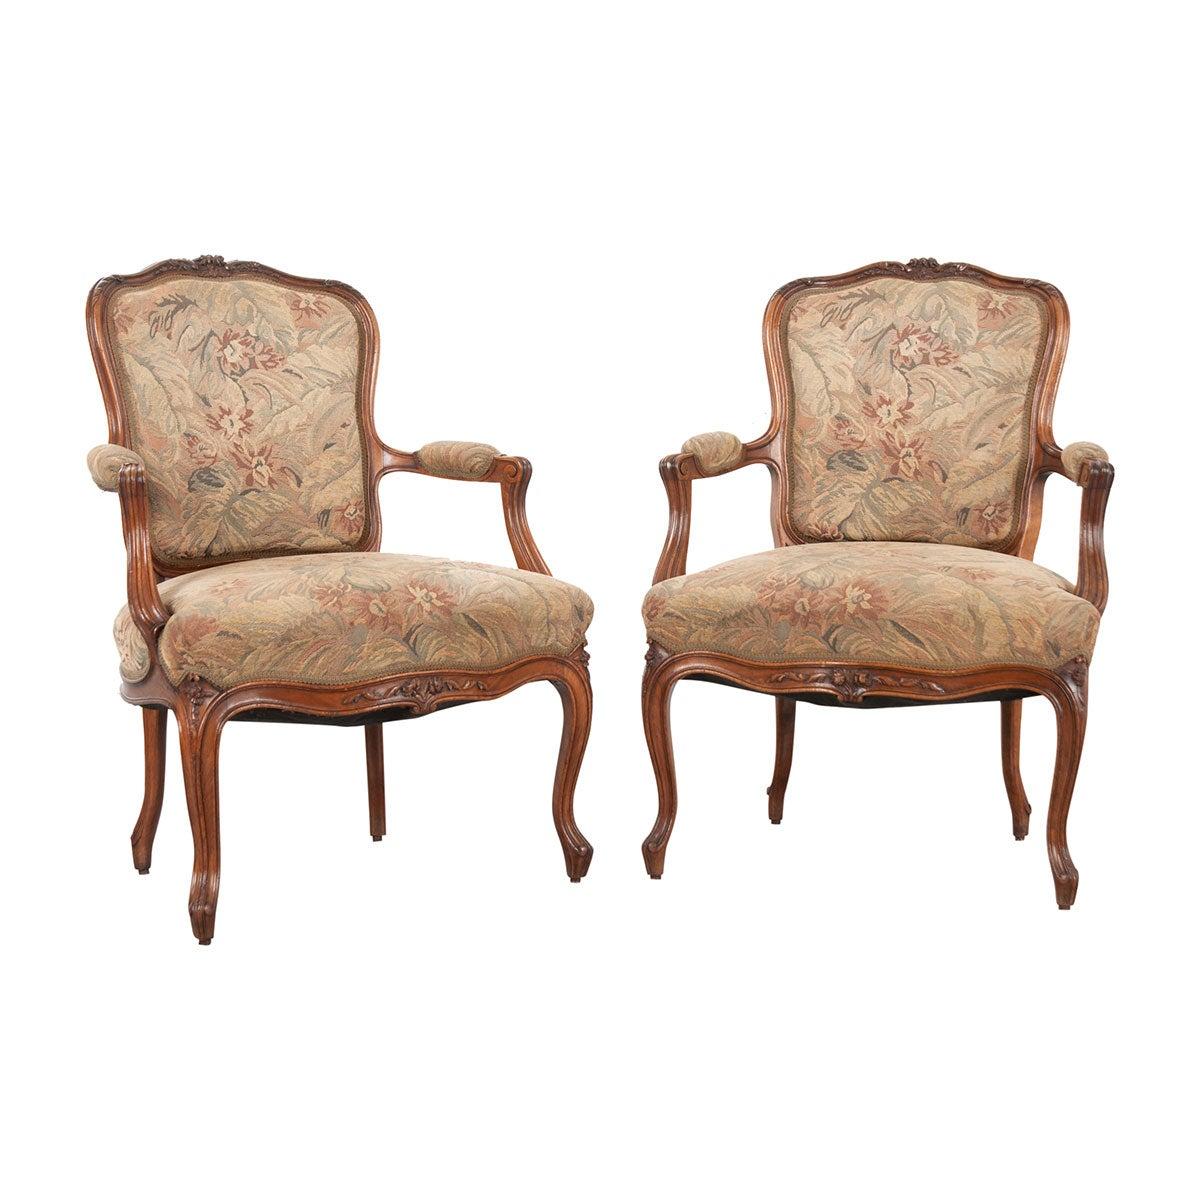 Pair of French Louis XVI-Style Fauteuils